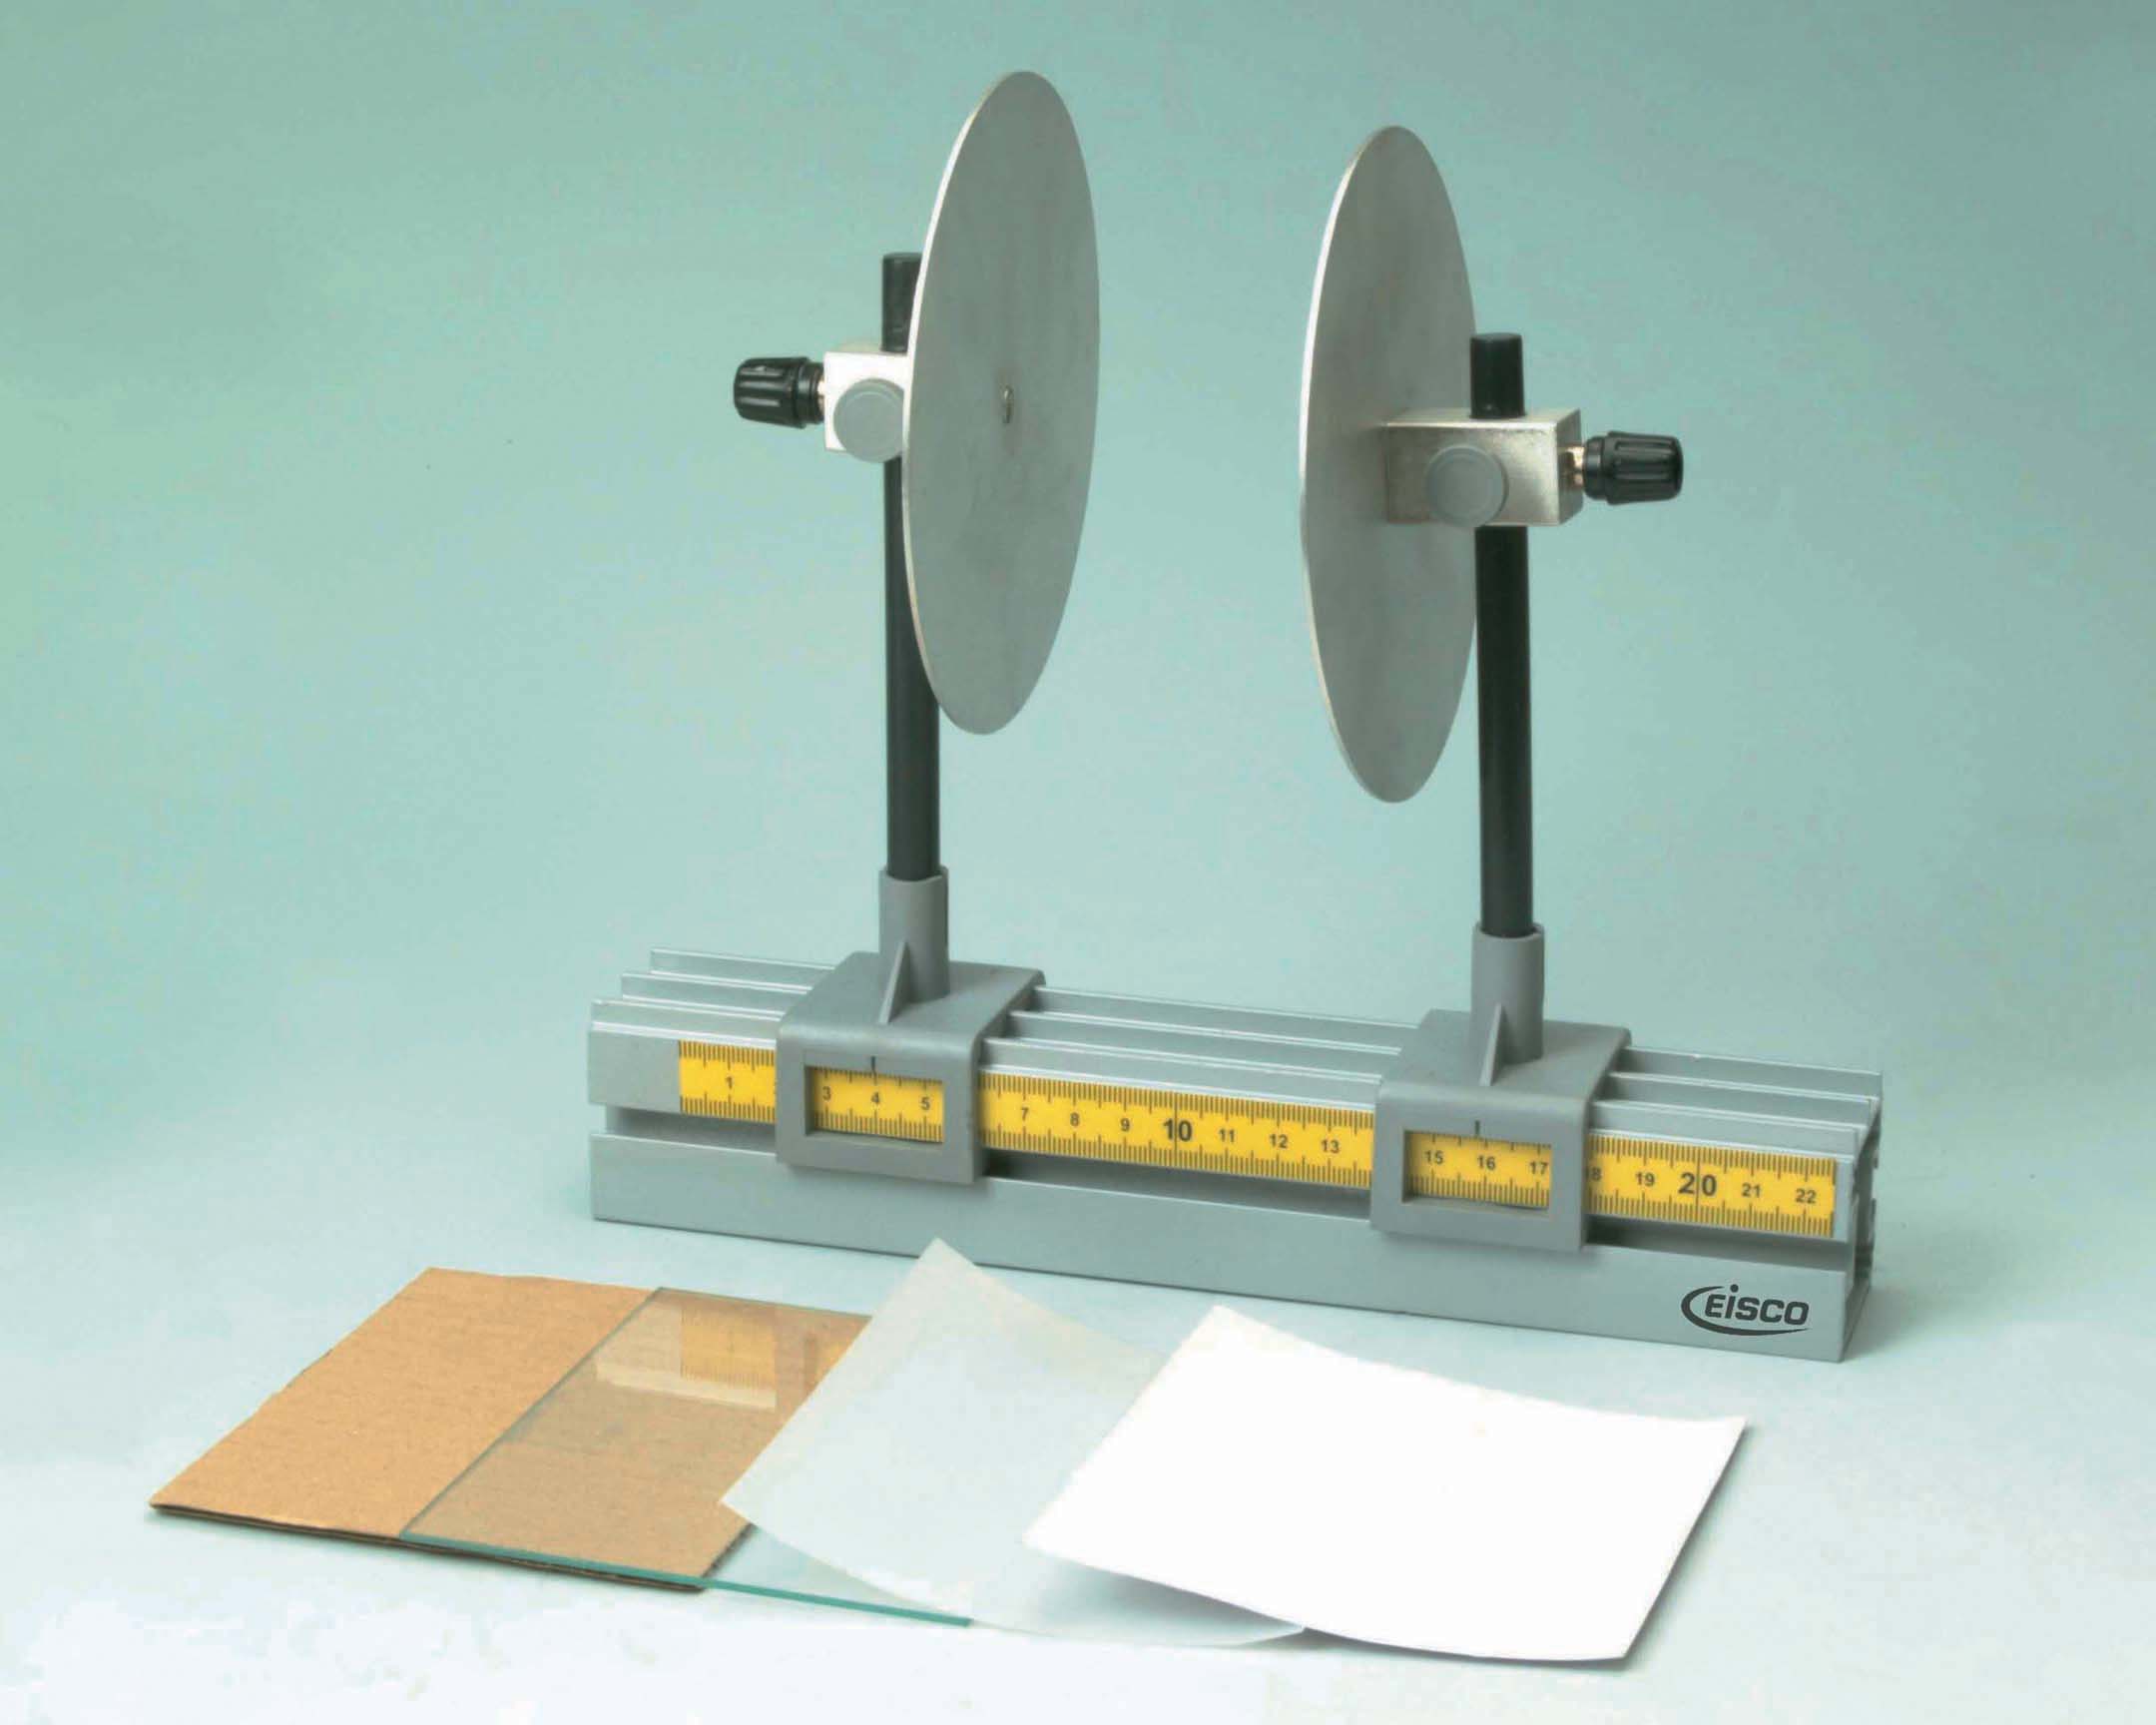 Parallel Plate Capacitor Demonstration, Adjustable Distance/Height